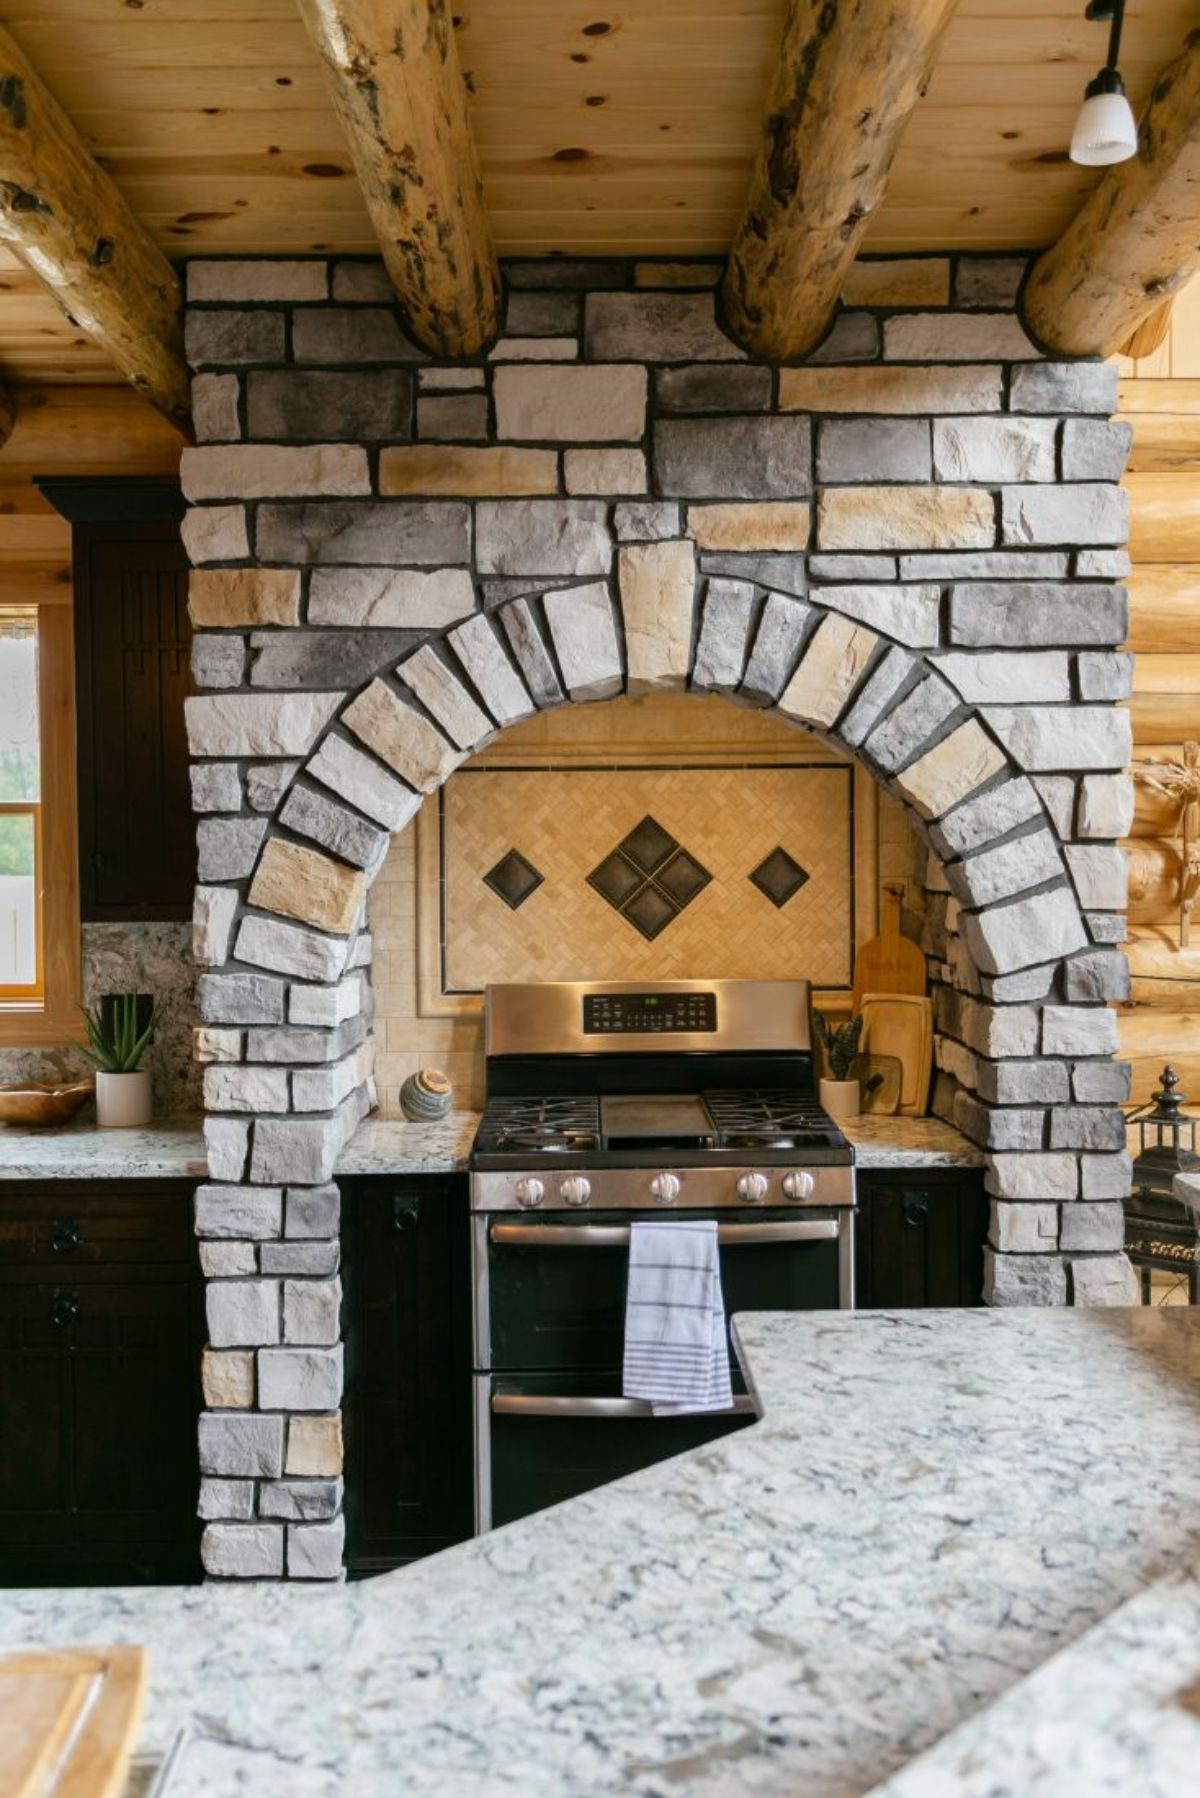 stove against cream wall with custom tile background and stone surround